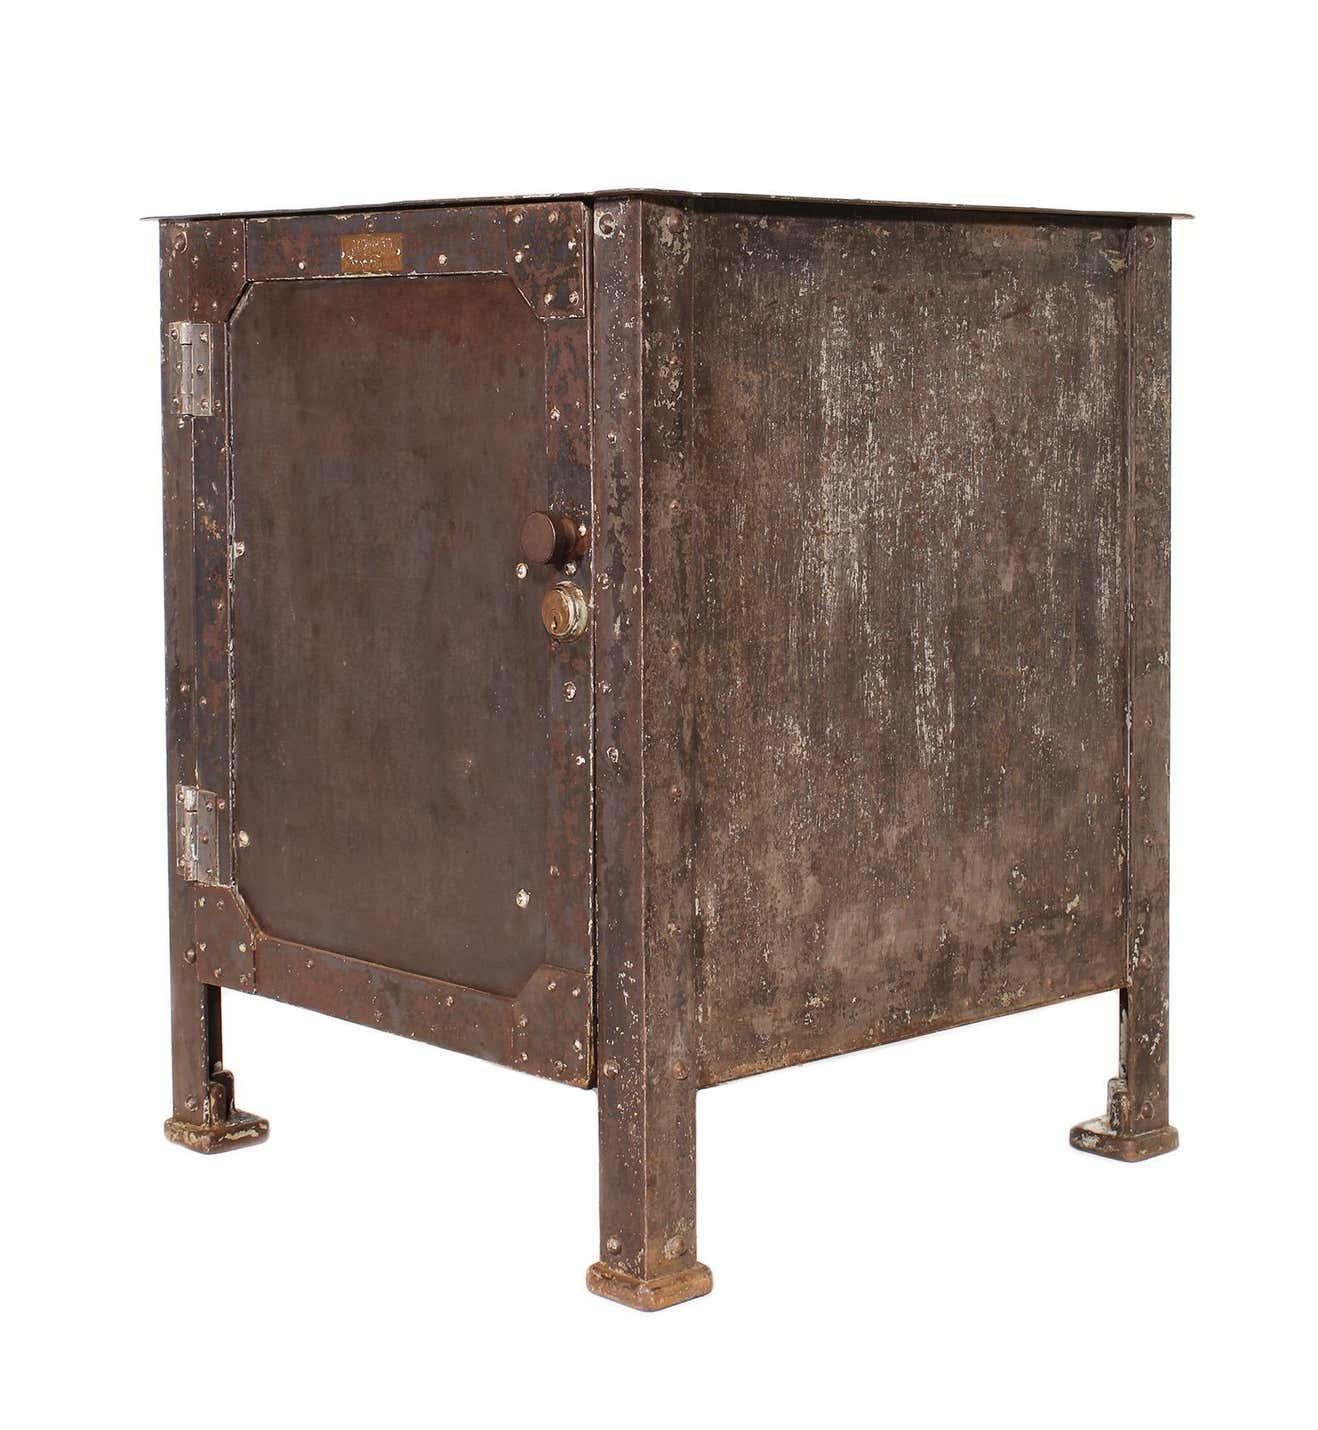 Authentic vintage steel riveted cabinet made by Textile Machine Works in Reading, PA. 

Overall Dimensions: 25 1/8